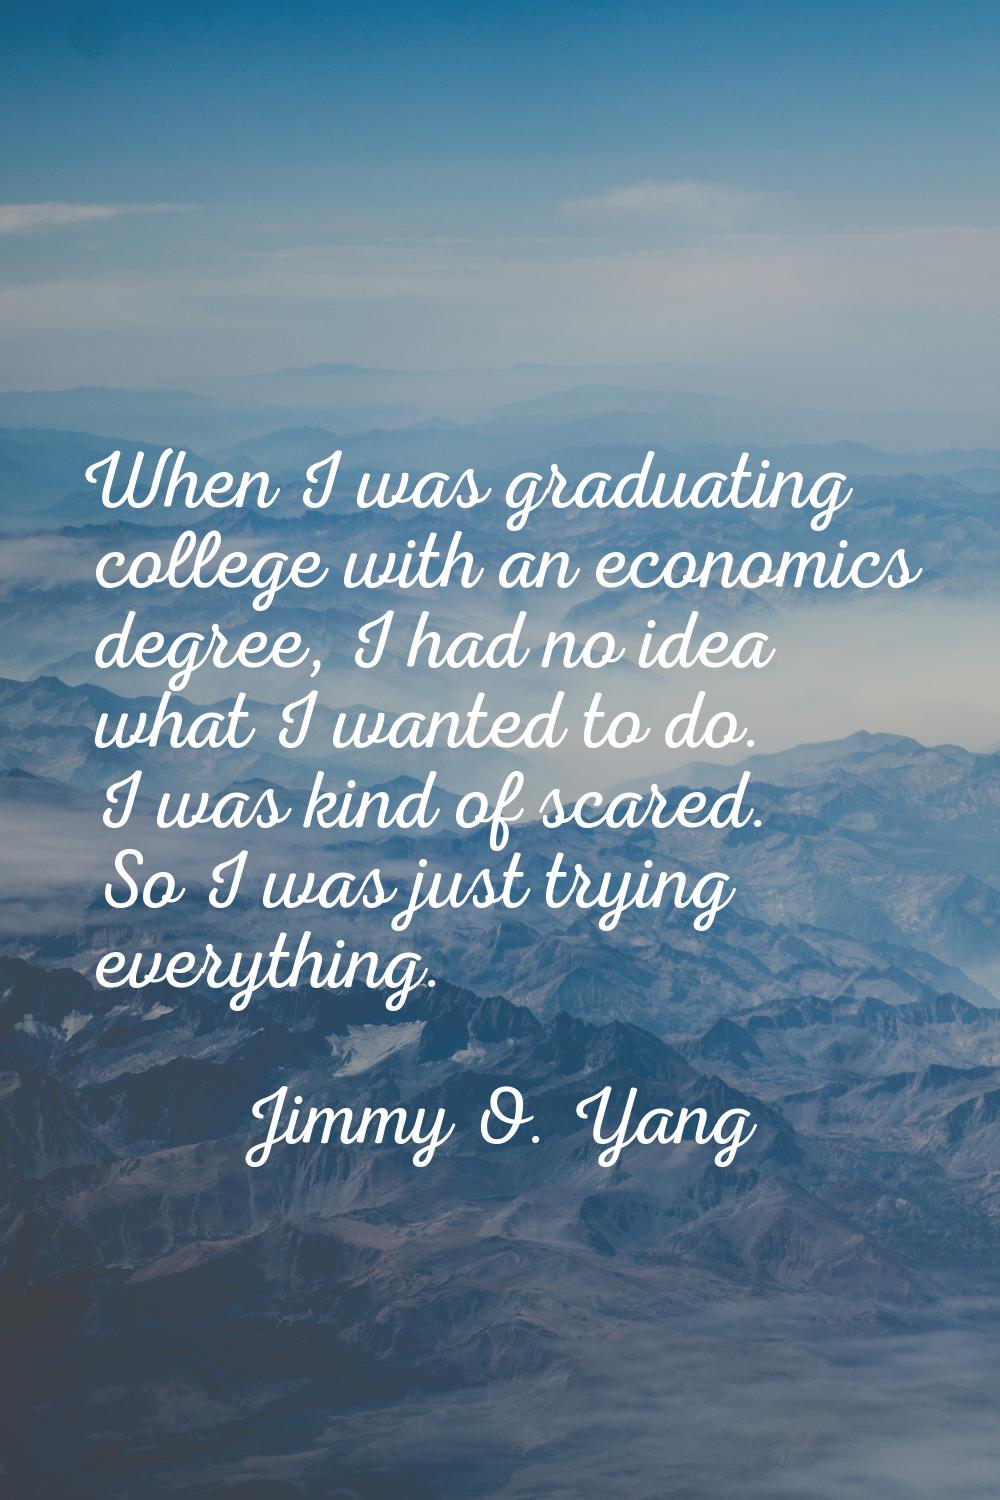 When I was graduating college with an economics degree, I had no idea what I wanted to do. I was ki